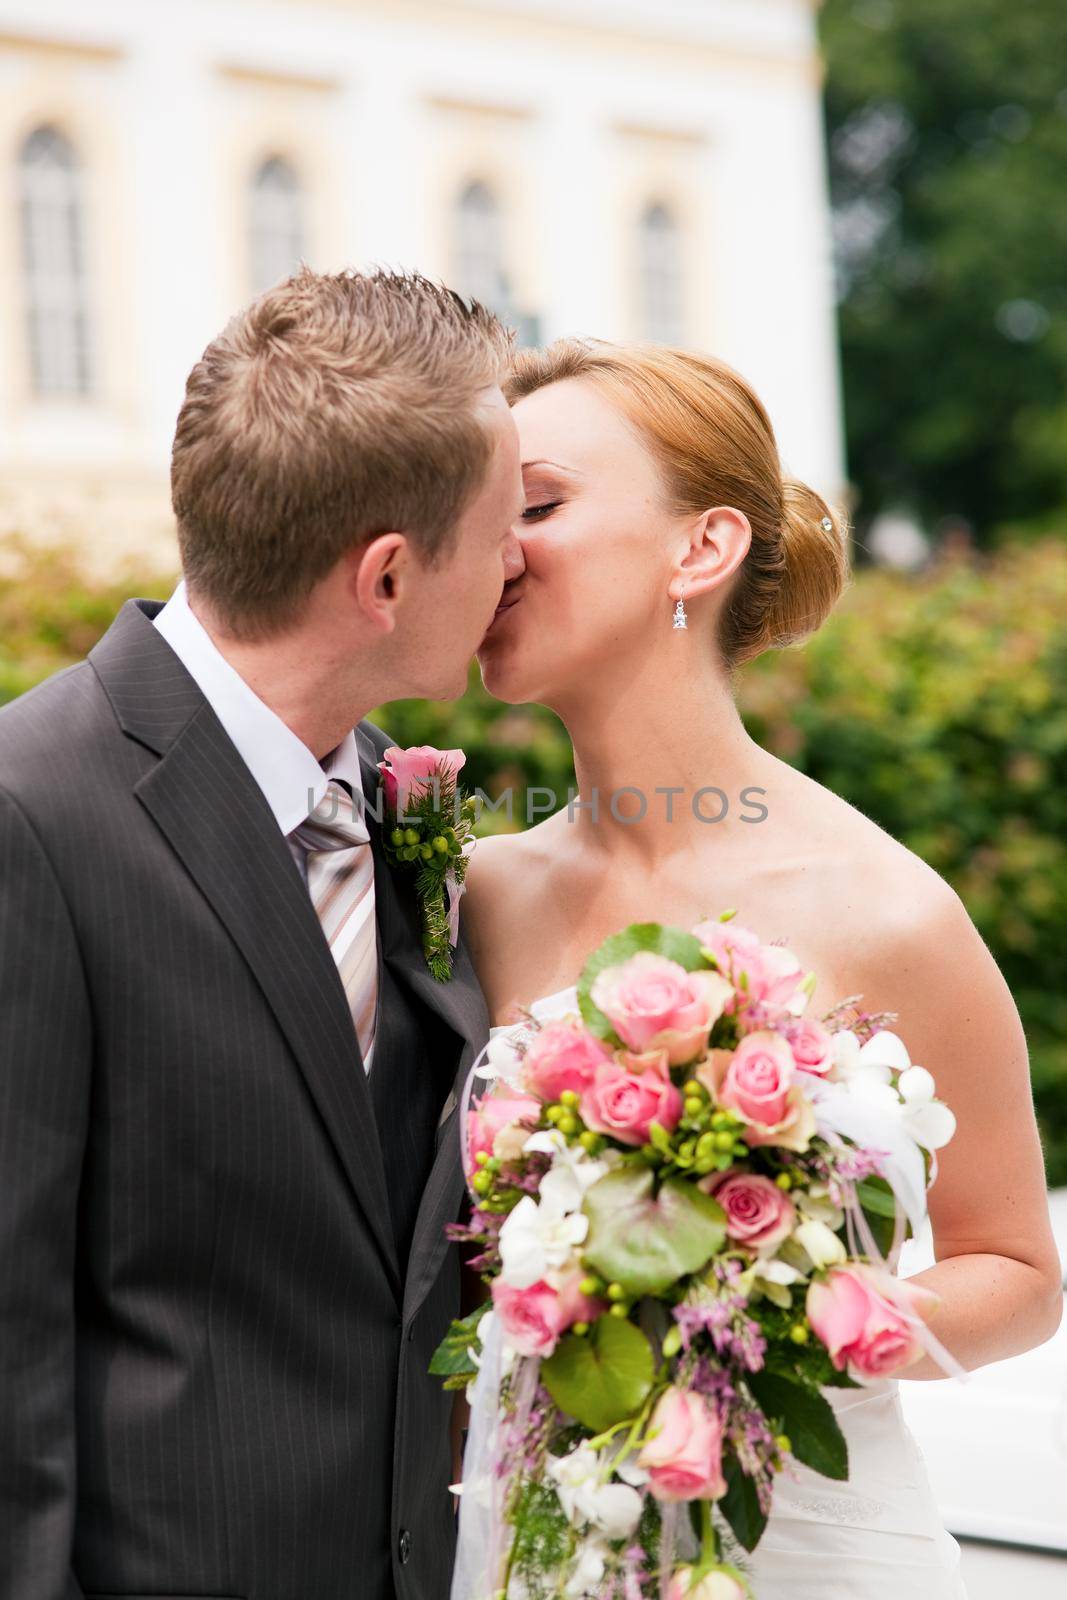 Wedding - groom kissing the bride in a park, she is holding the bouquet of flowers